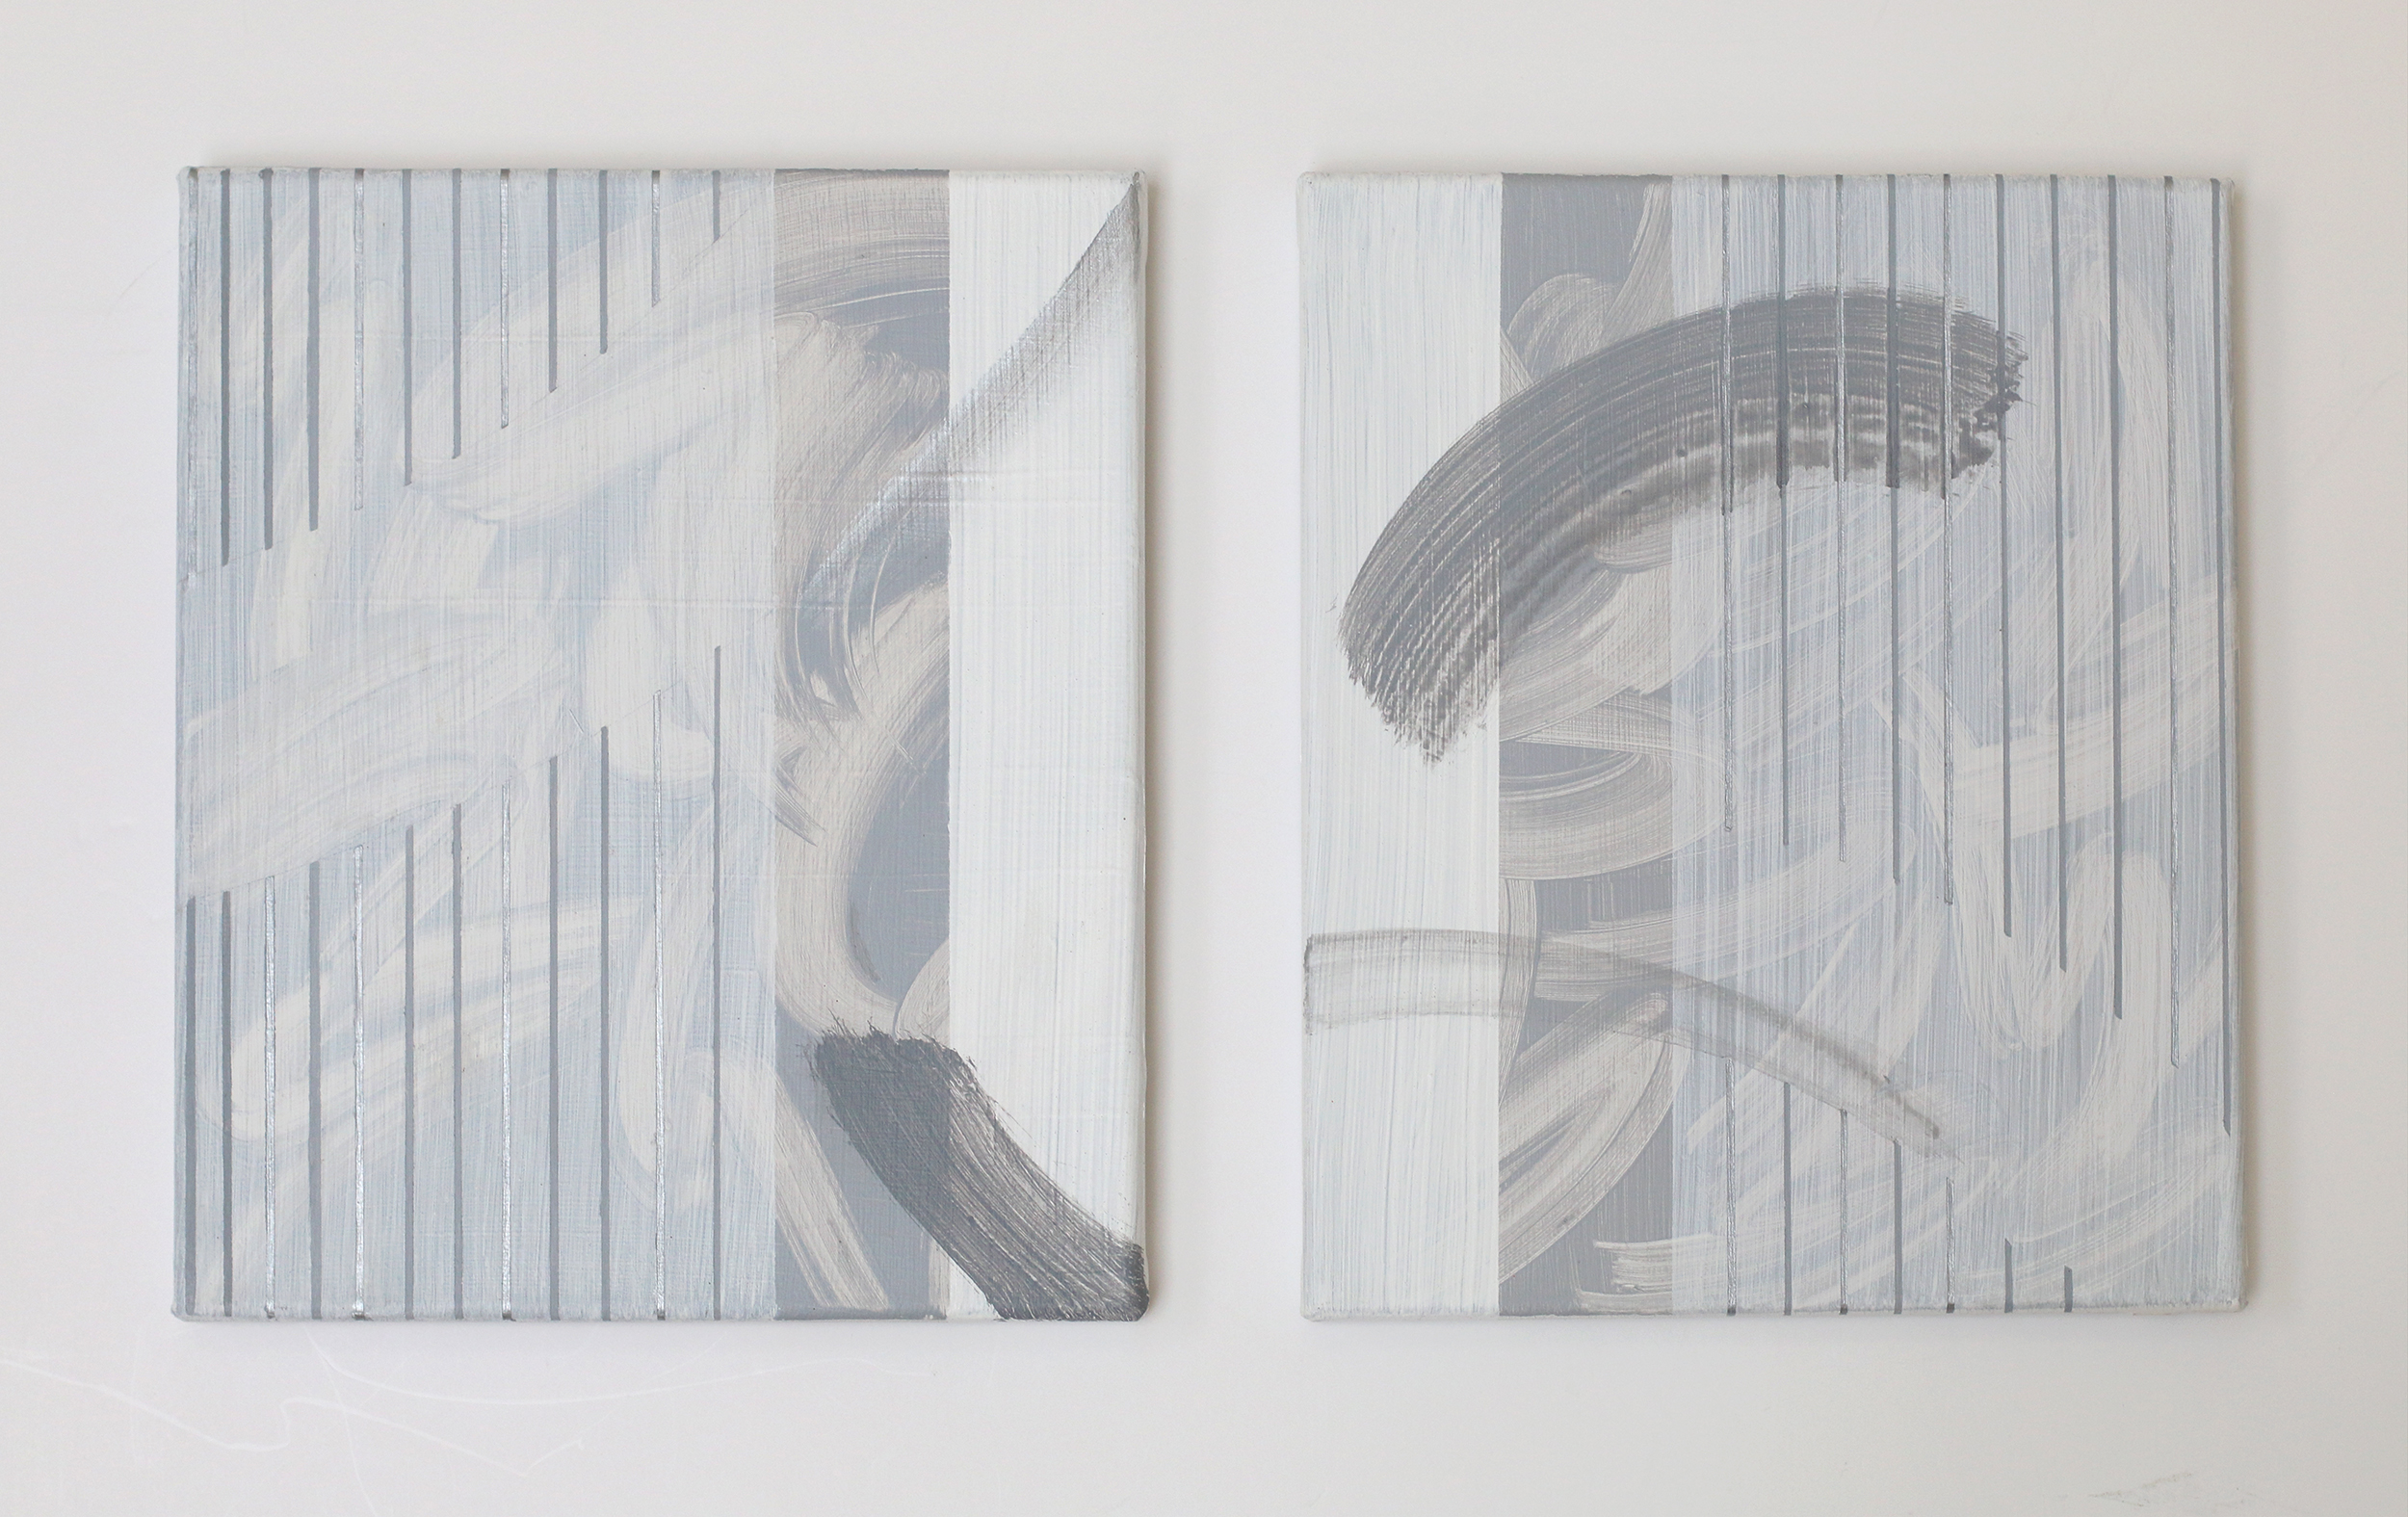 Zanny Mellor, Into diptych